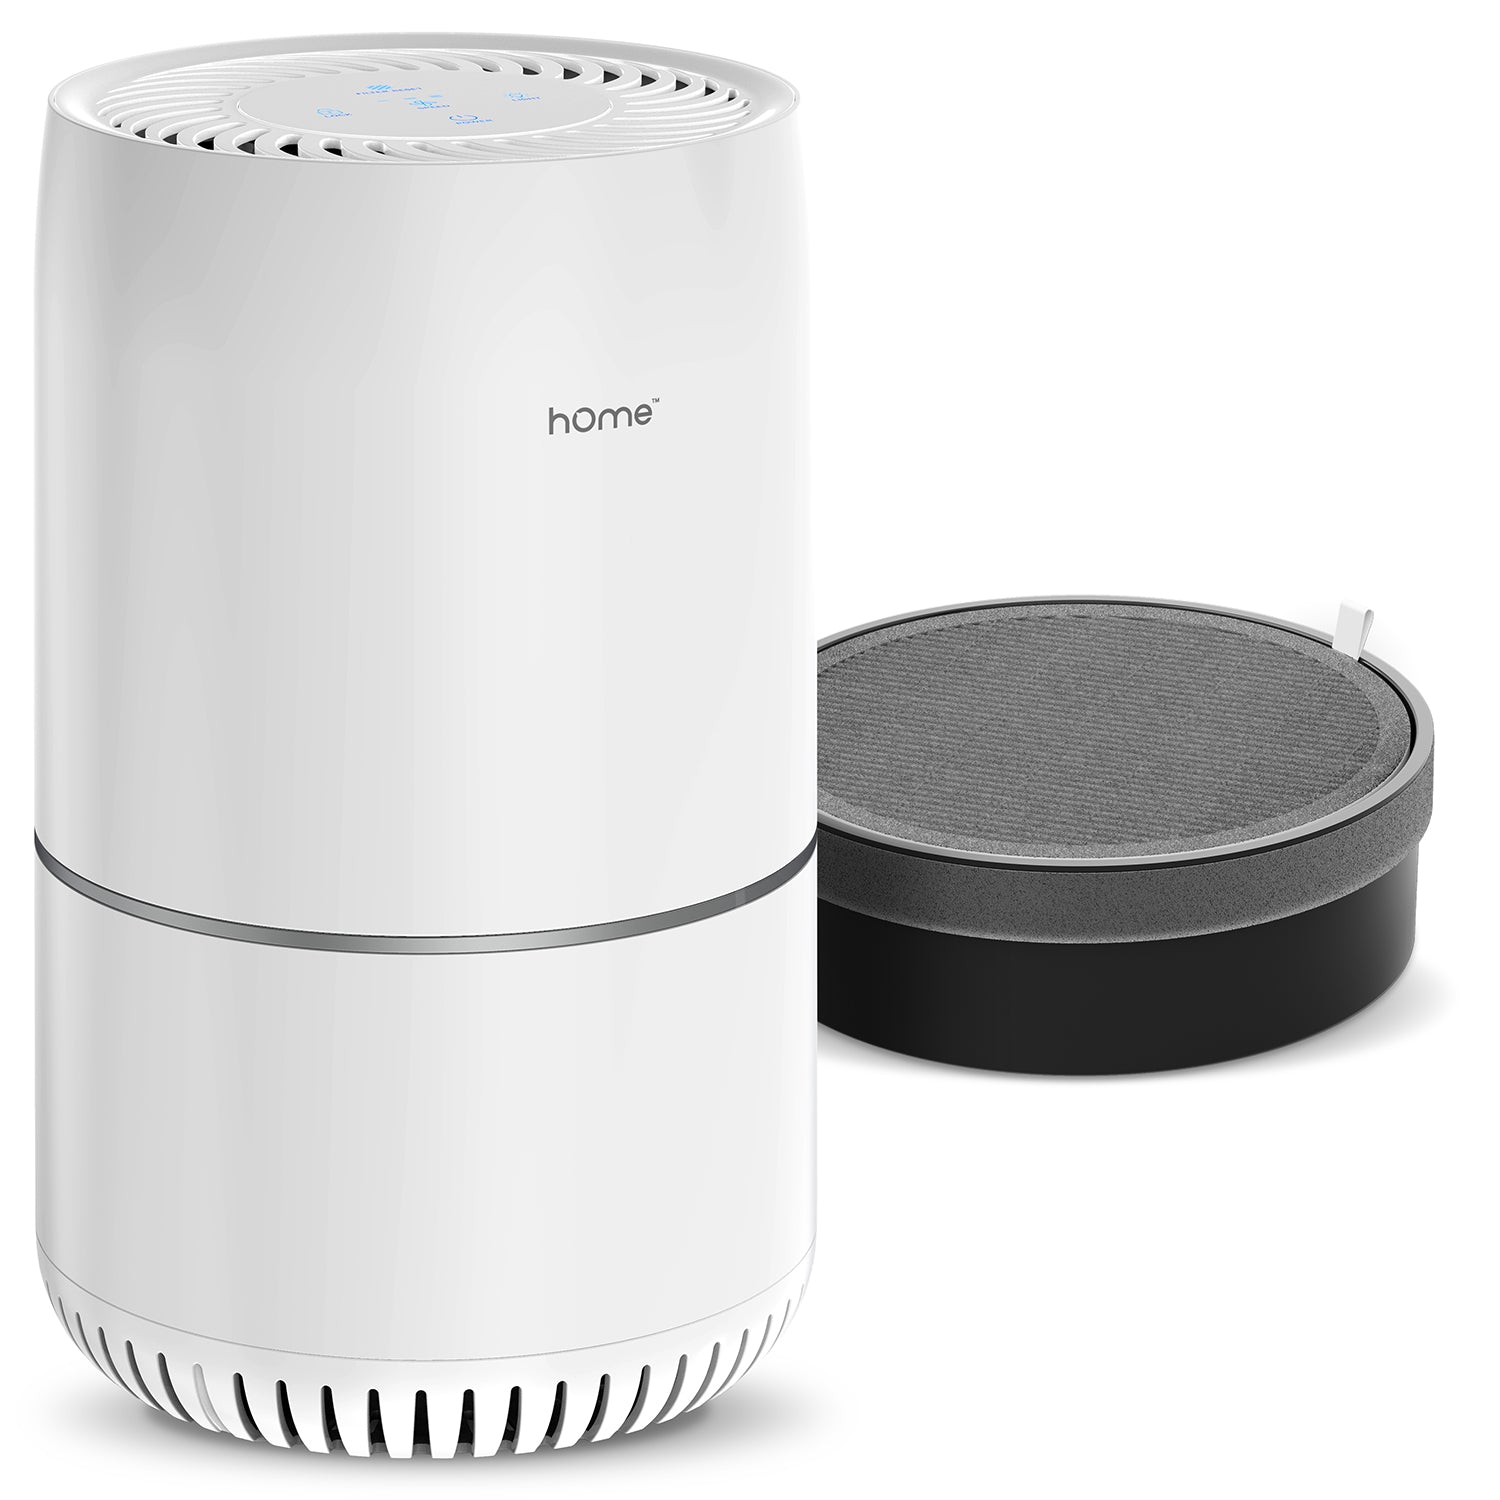 Air Purifier with 1 Pack Filter Bundle